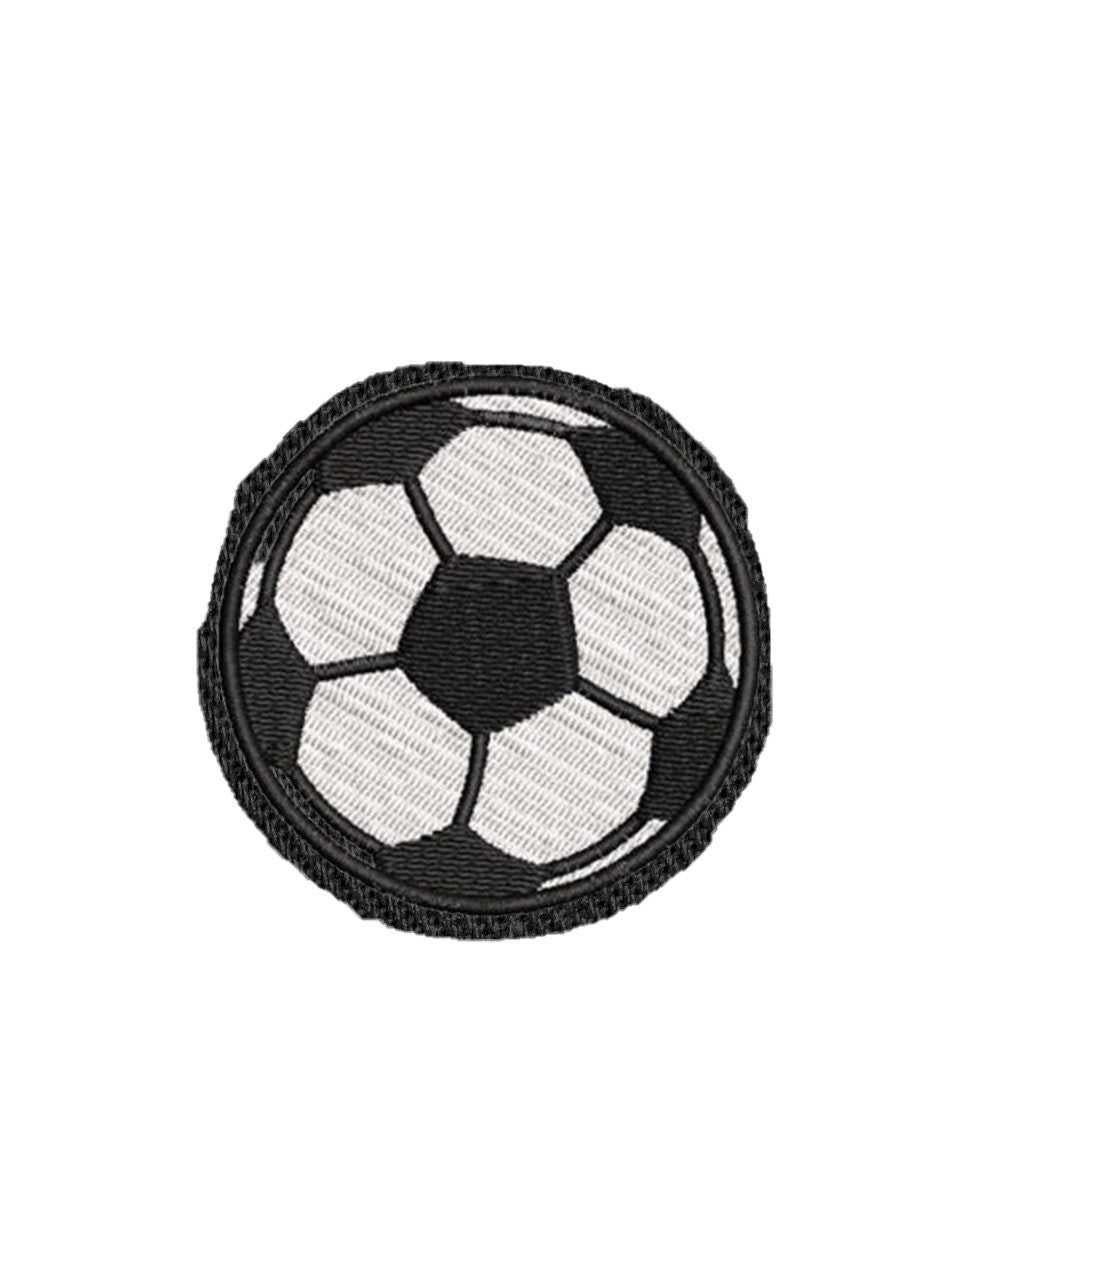 Football Ball Iron on Patch / Sew on embroidered patches - Hobbies & Sports Embroidery Women Applique Merit Badge for Clothing Jacket